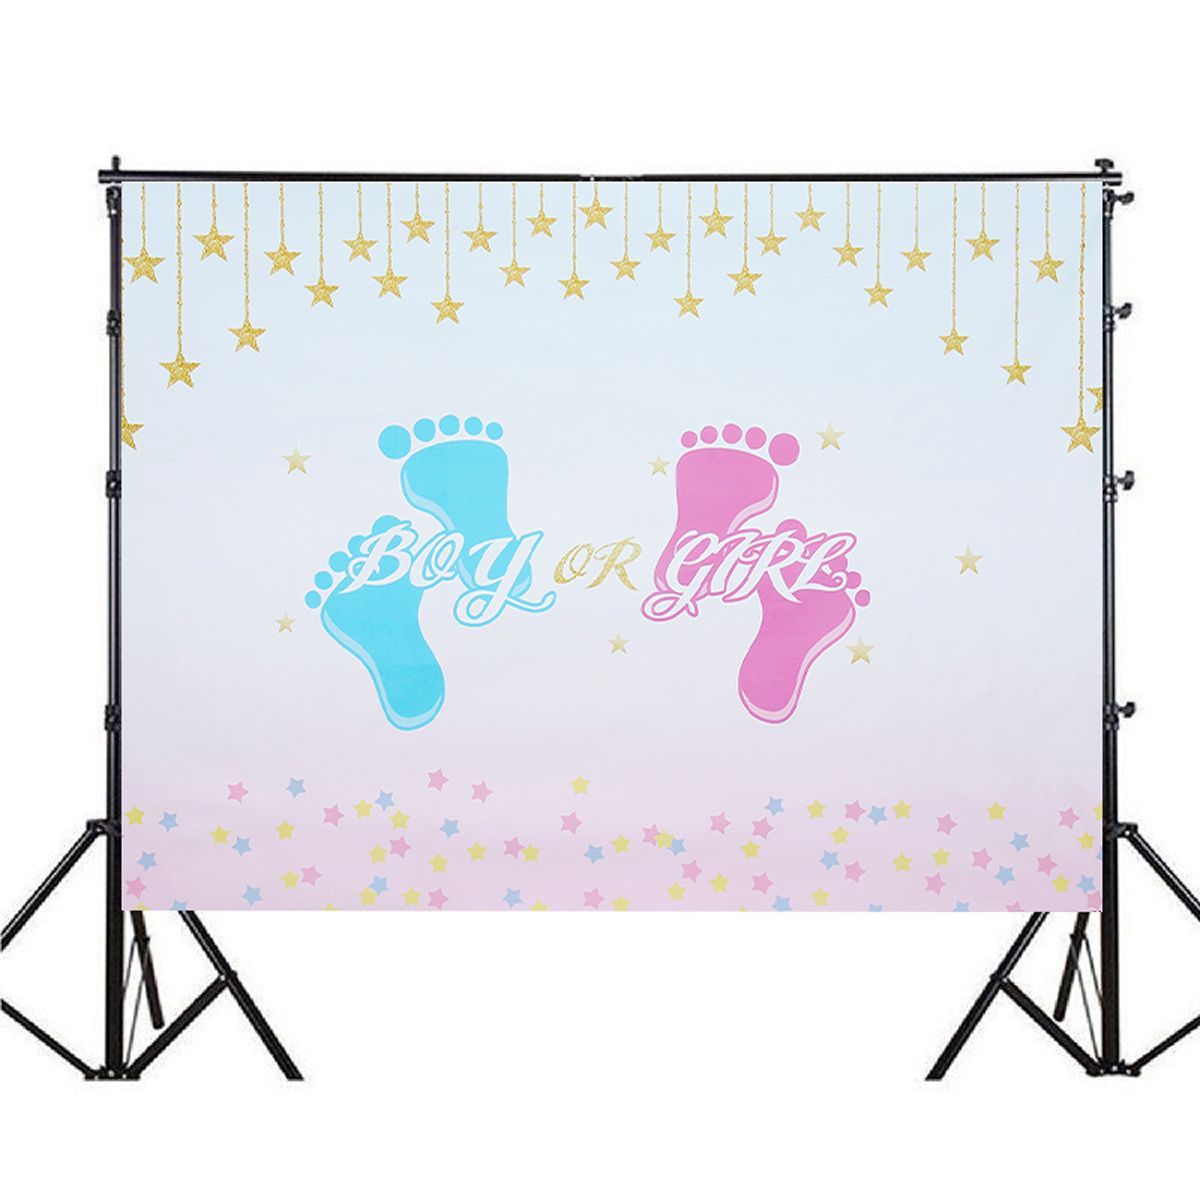 5x3FT-7x5FT-9x6FT-Foot-Print-Boy-or-Girl-Photography-Backdrop-Background-Studio-Prop-1636207